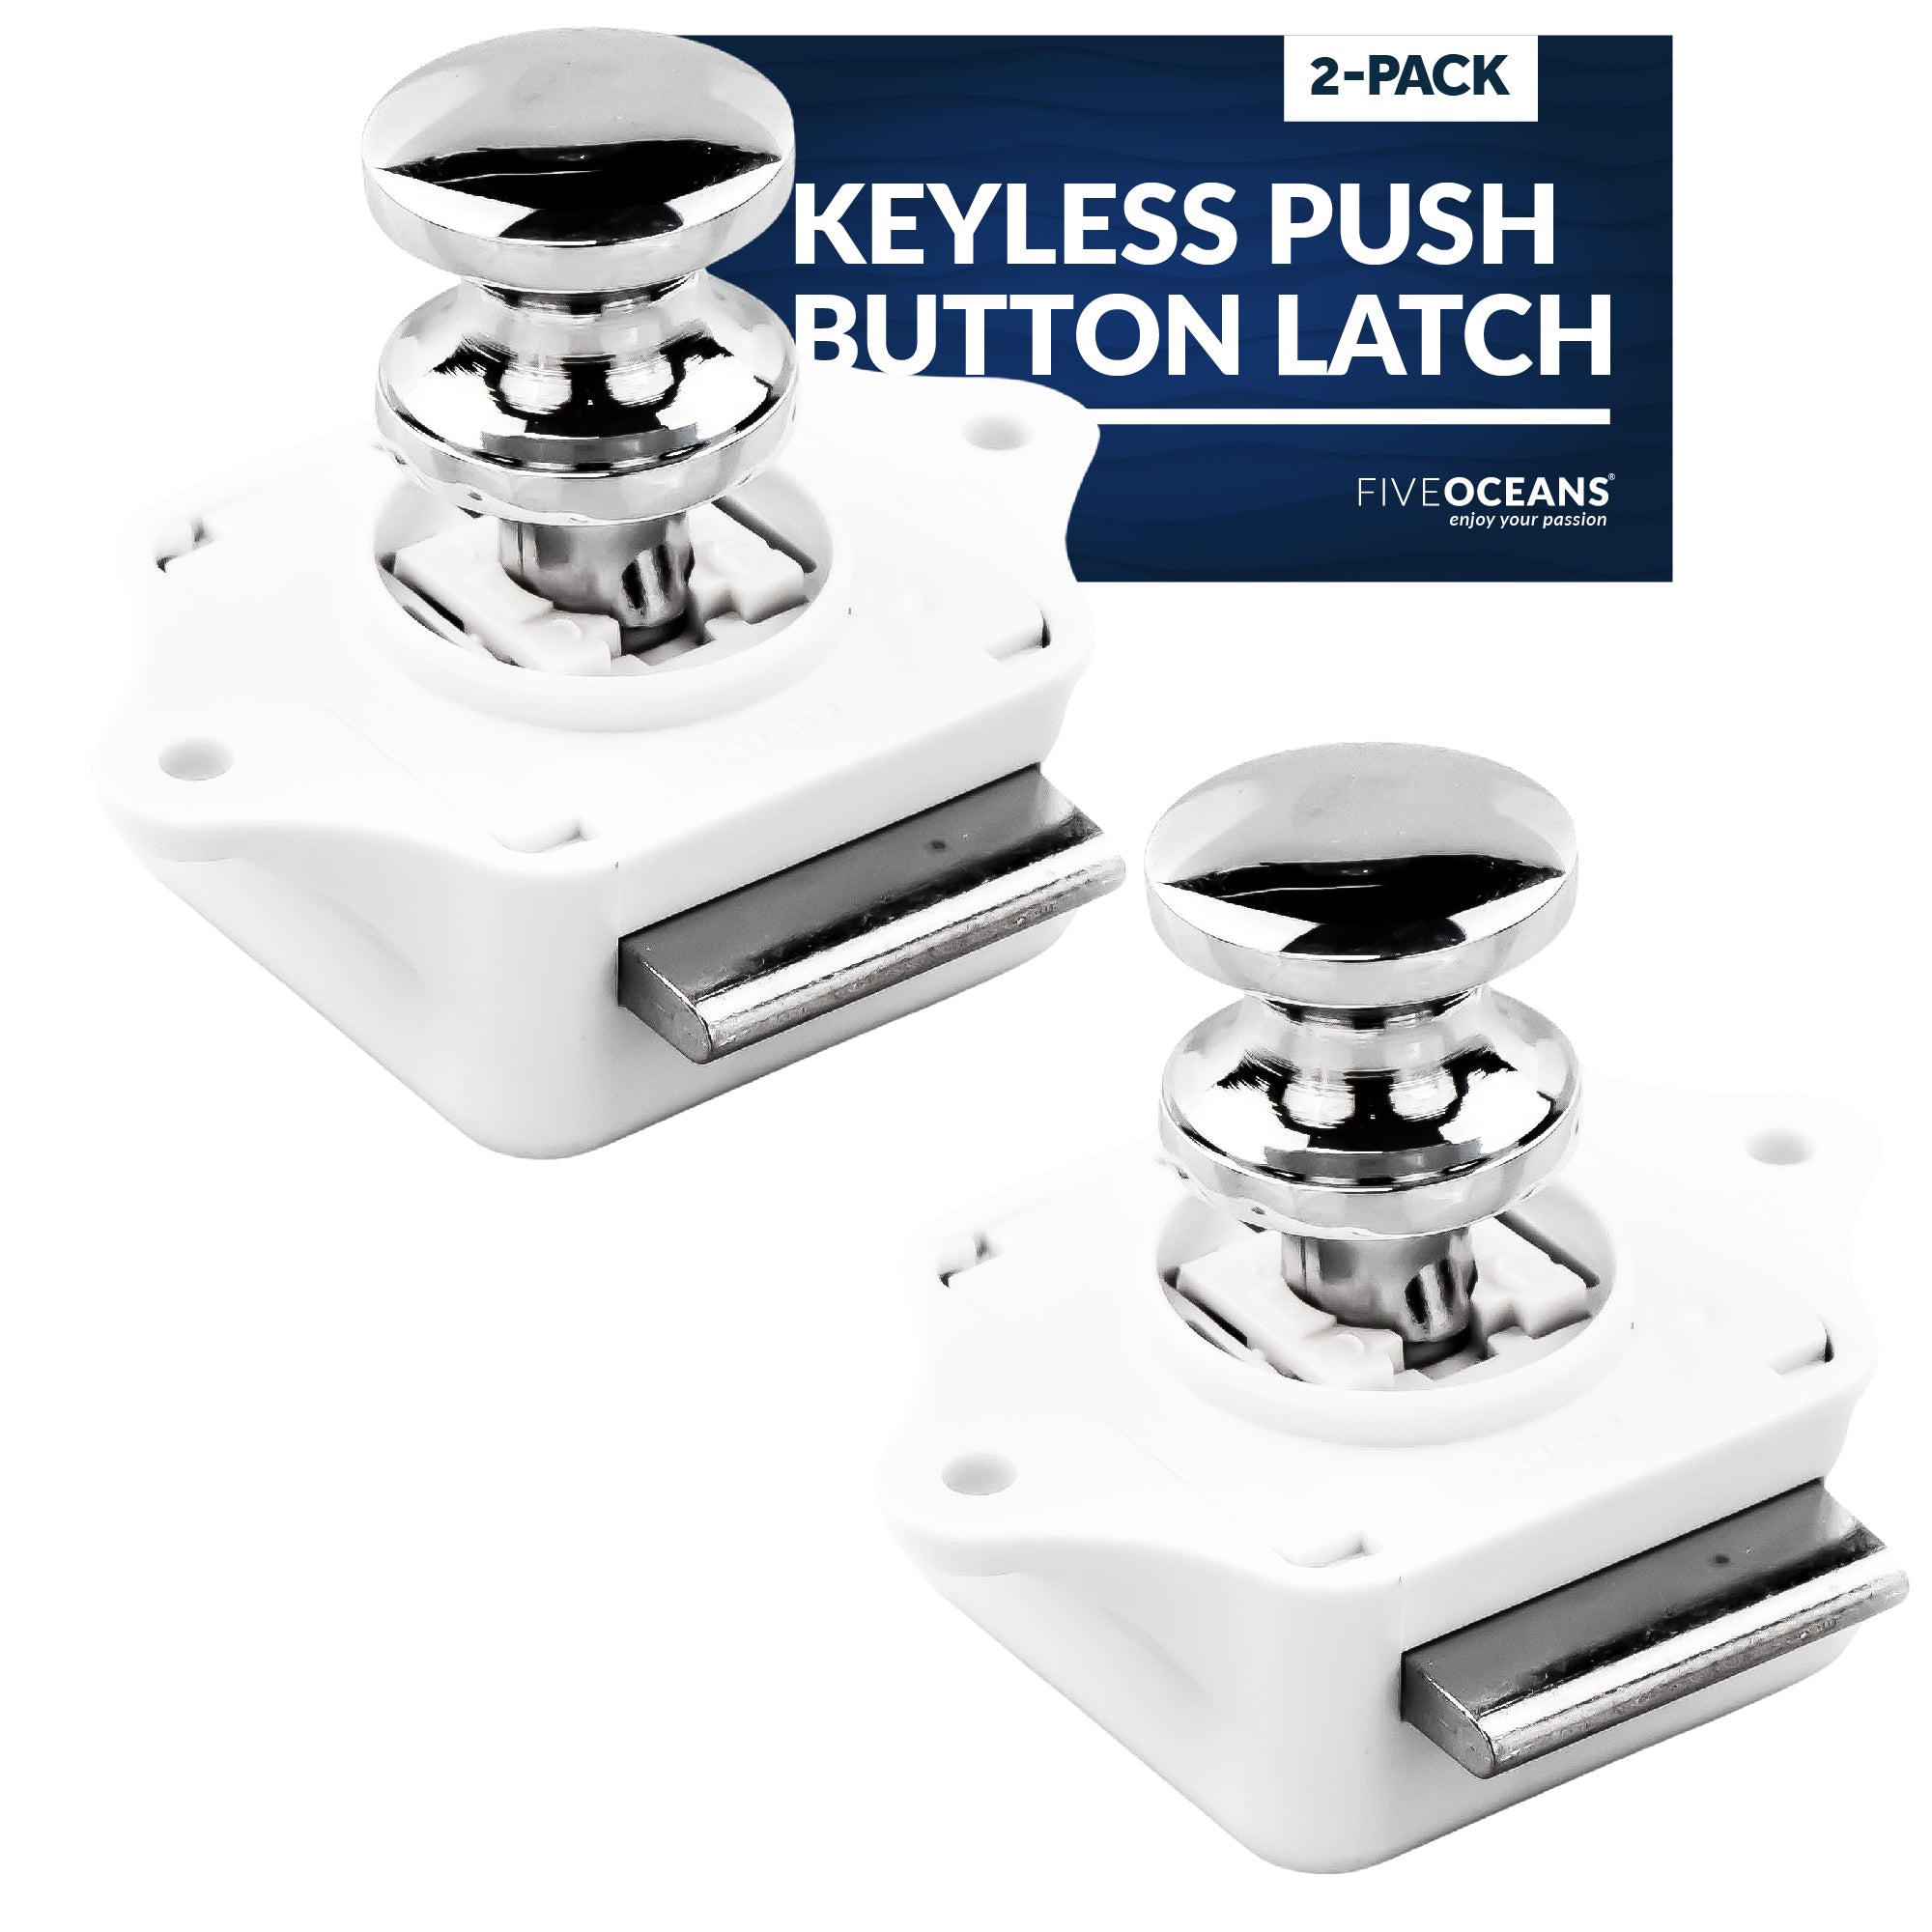 Keyless Push Button Latch, Stainless Steel, 2-Pack - FO92-M2